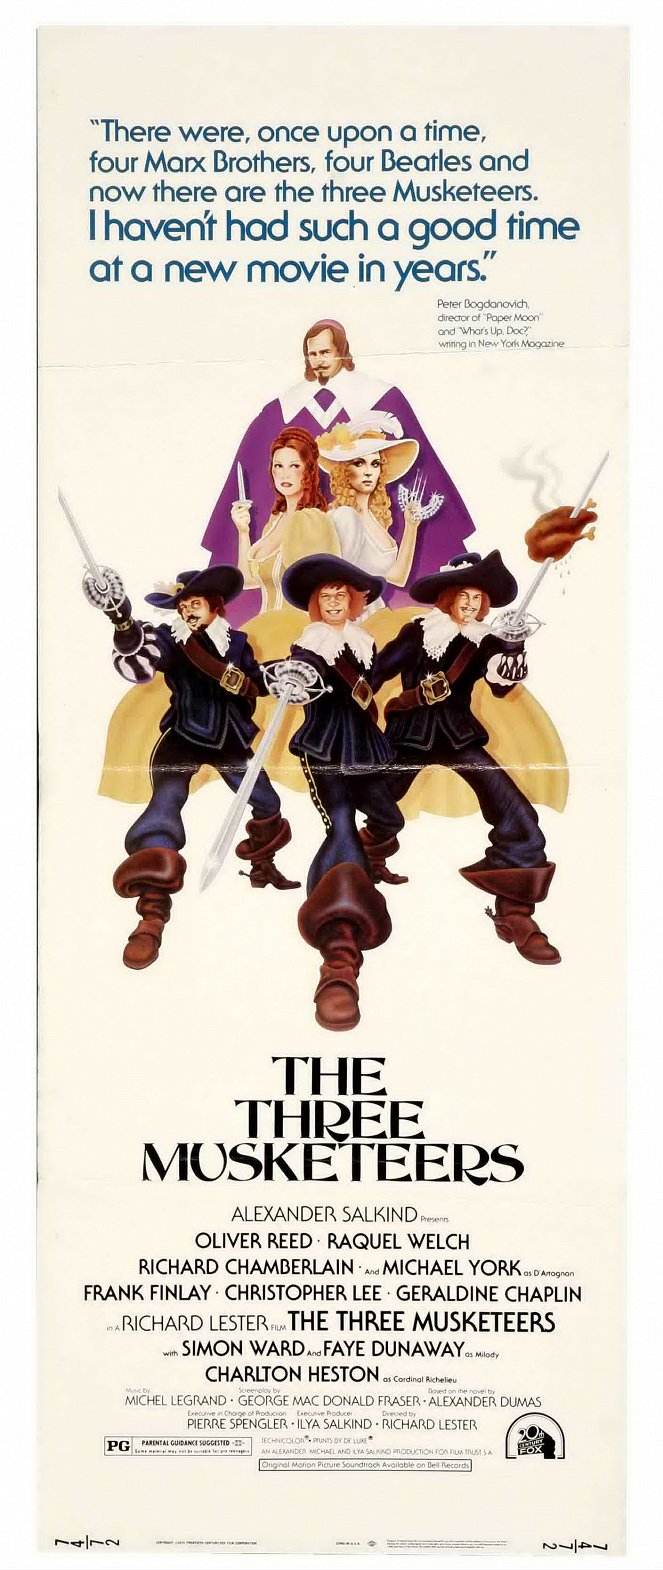 Richard Lester's The Three Musketeers - Posters